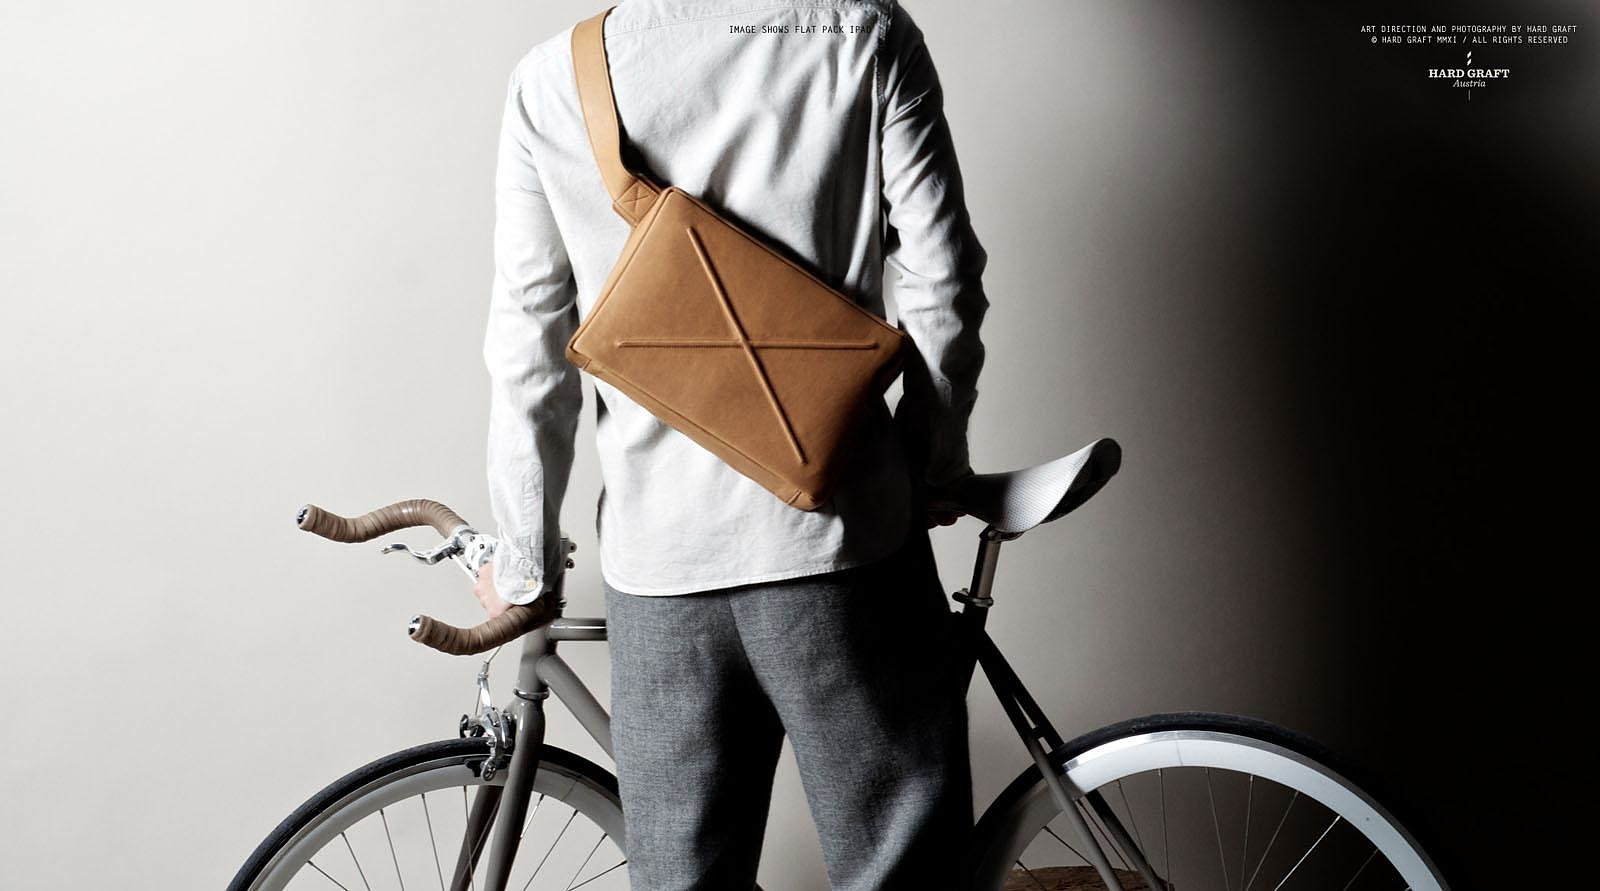 Flat Pack Leather Laptop Bag by Hard Graft.